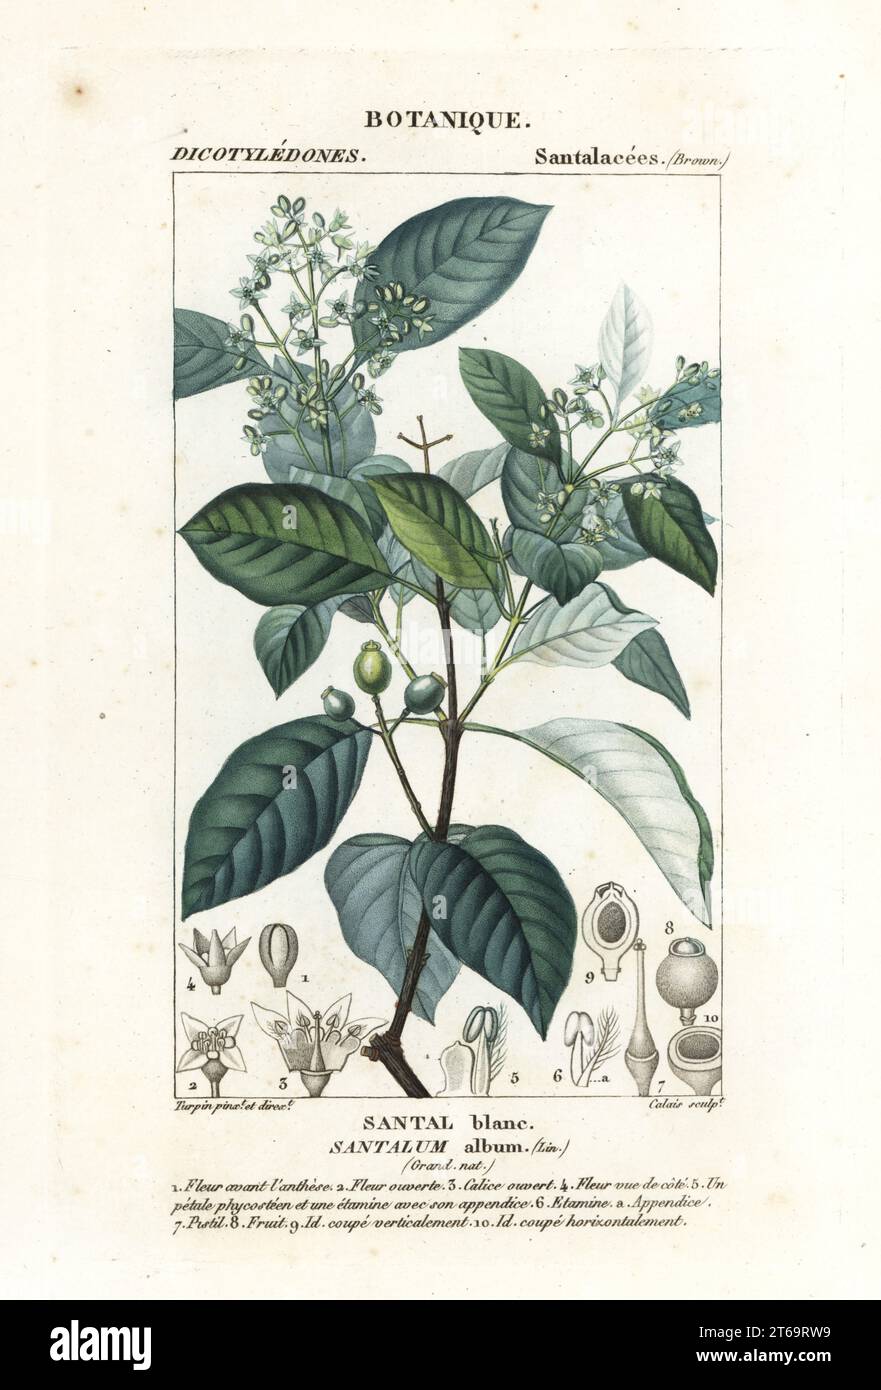 Indian sandalwood, Santalum album, vulnerable. Santal blanc. Handcoloured copperplate stipple engraving from Antoine Laurent de Jussieu's Dizionario delle Scienze Naturali, Dictionary of Natural Science, Florence, Italy, 1837. Illustration engraved by Calais, drawn and directed by Pierre Jean-Francois Turpin, and published by Batelli e Figli. Turpin (1775-1840) is considered one of the greatest French botanical illustrators of the 19th century. Stock Photo